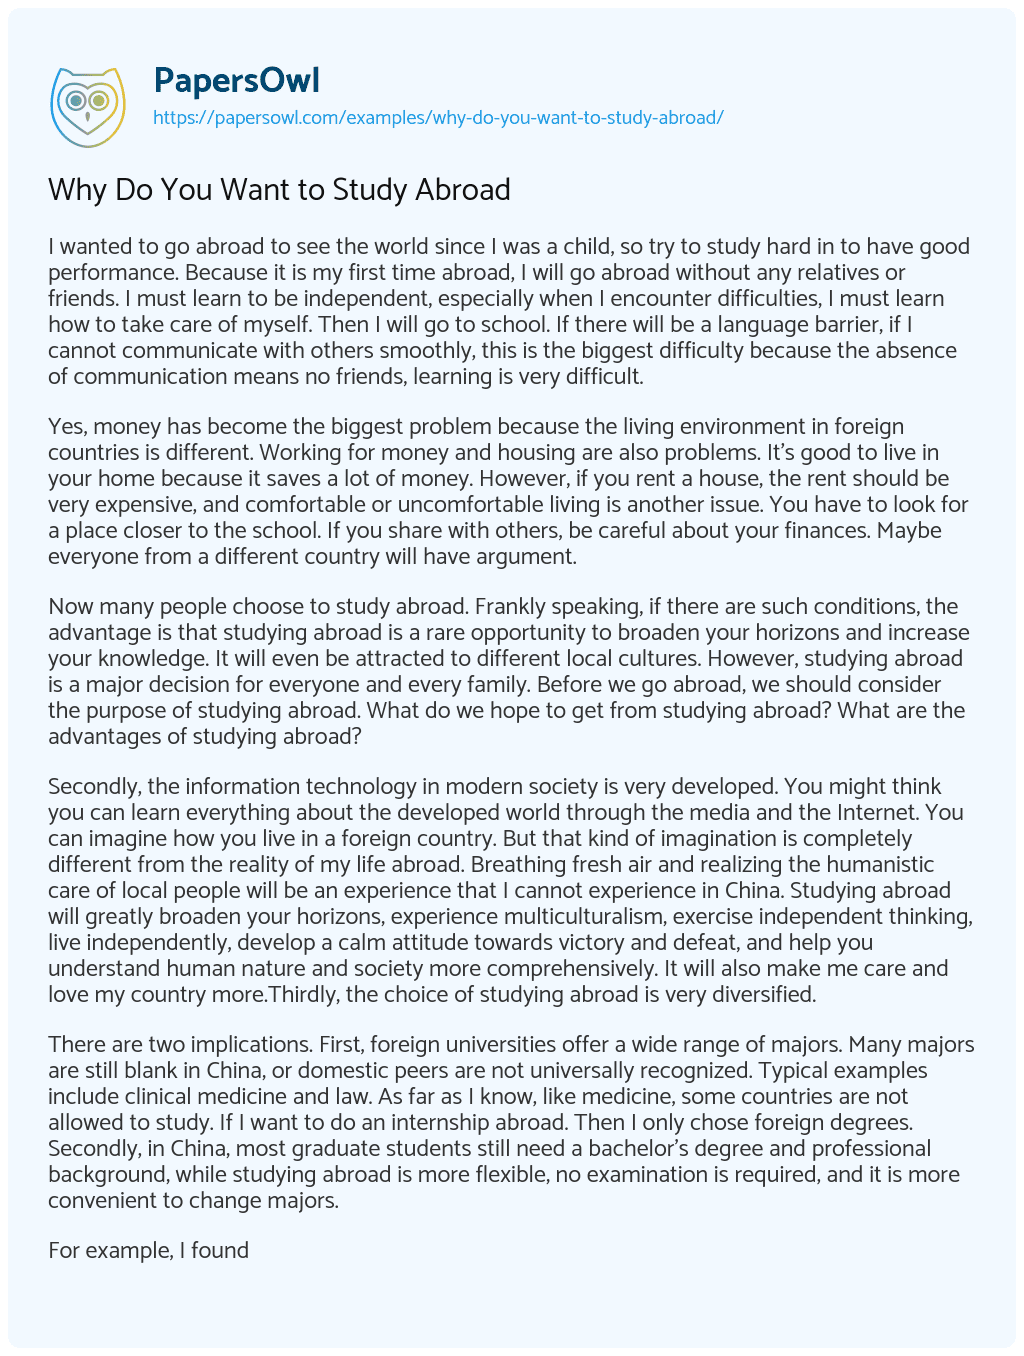 Essay on Why do you Want to Study Abroad